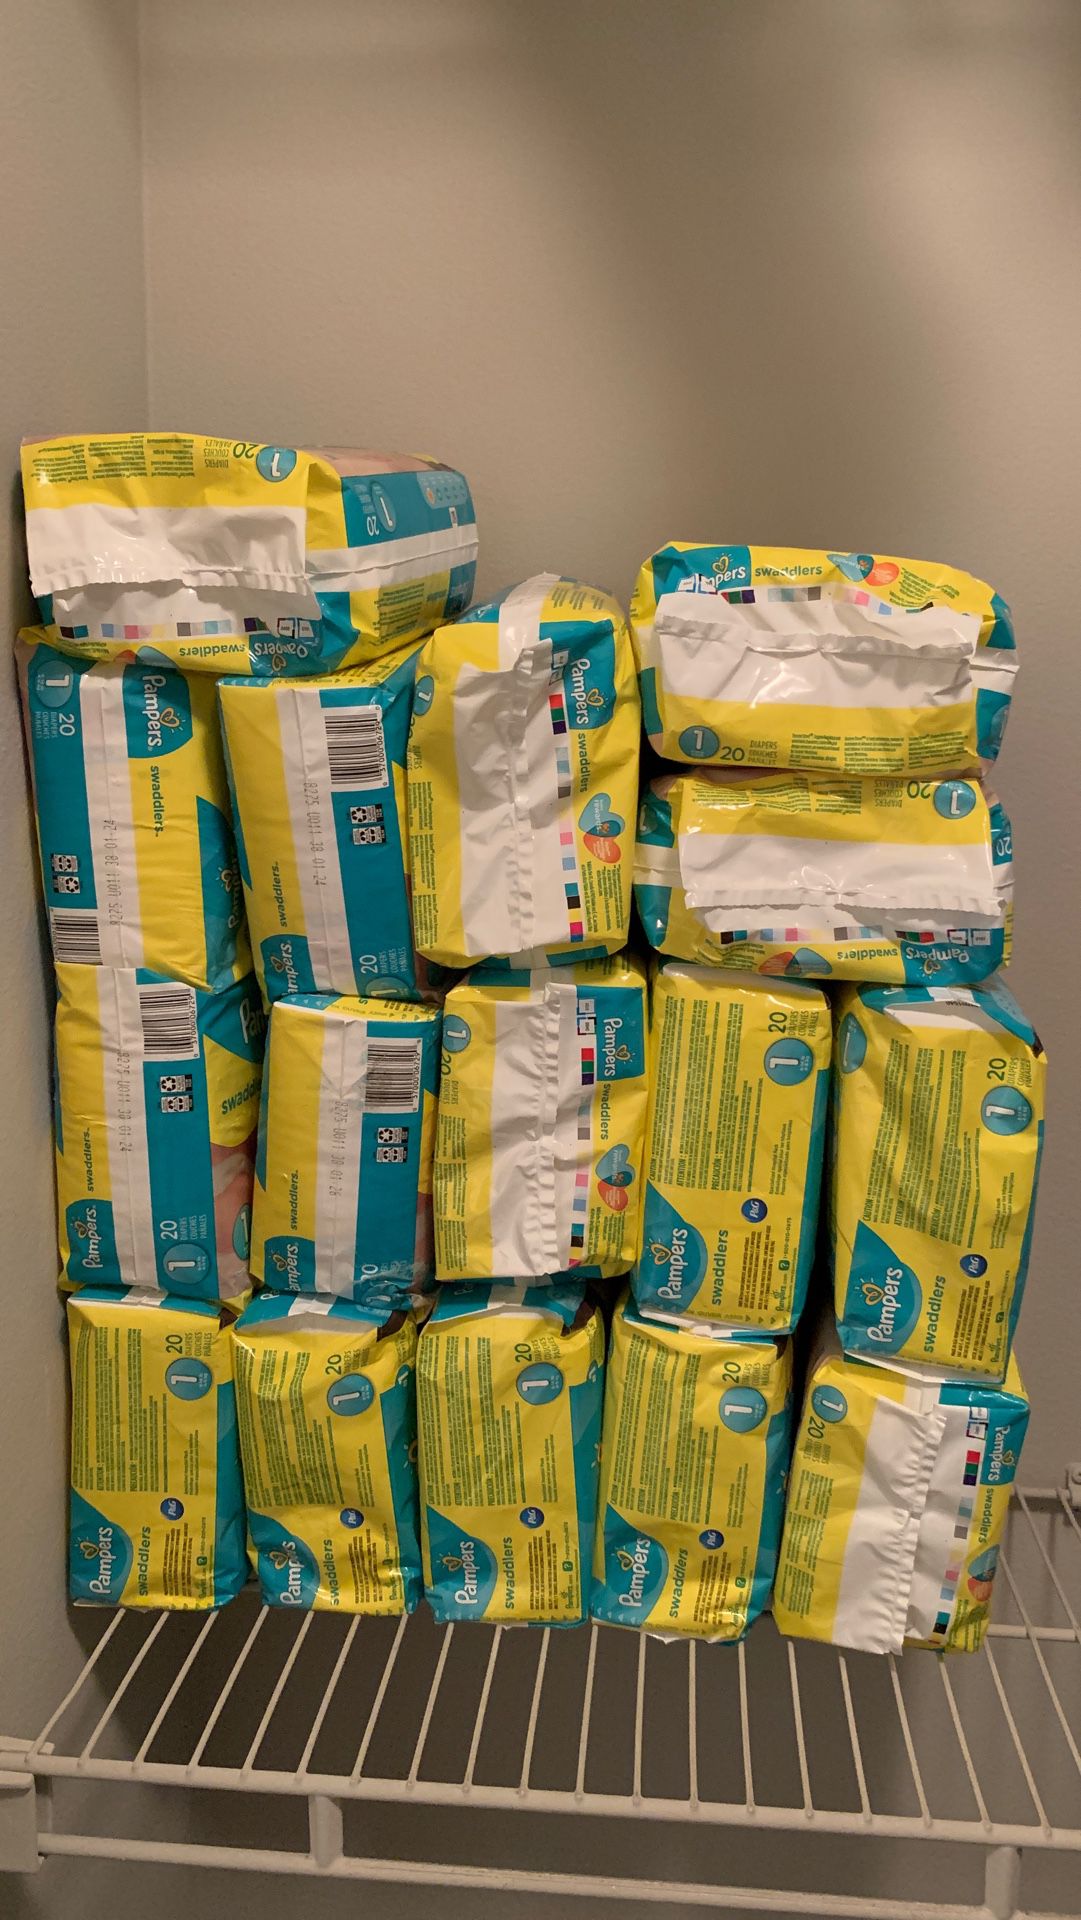 Size 1 pampers 20 count